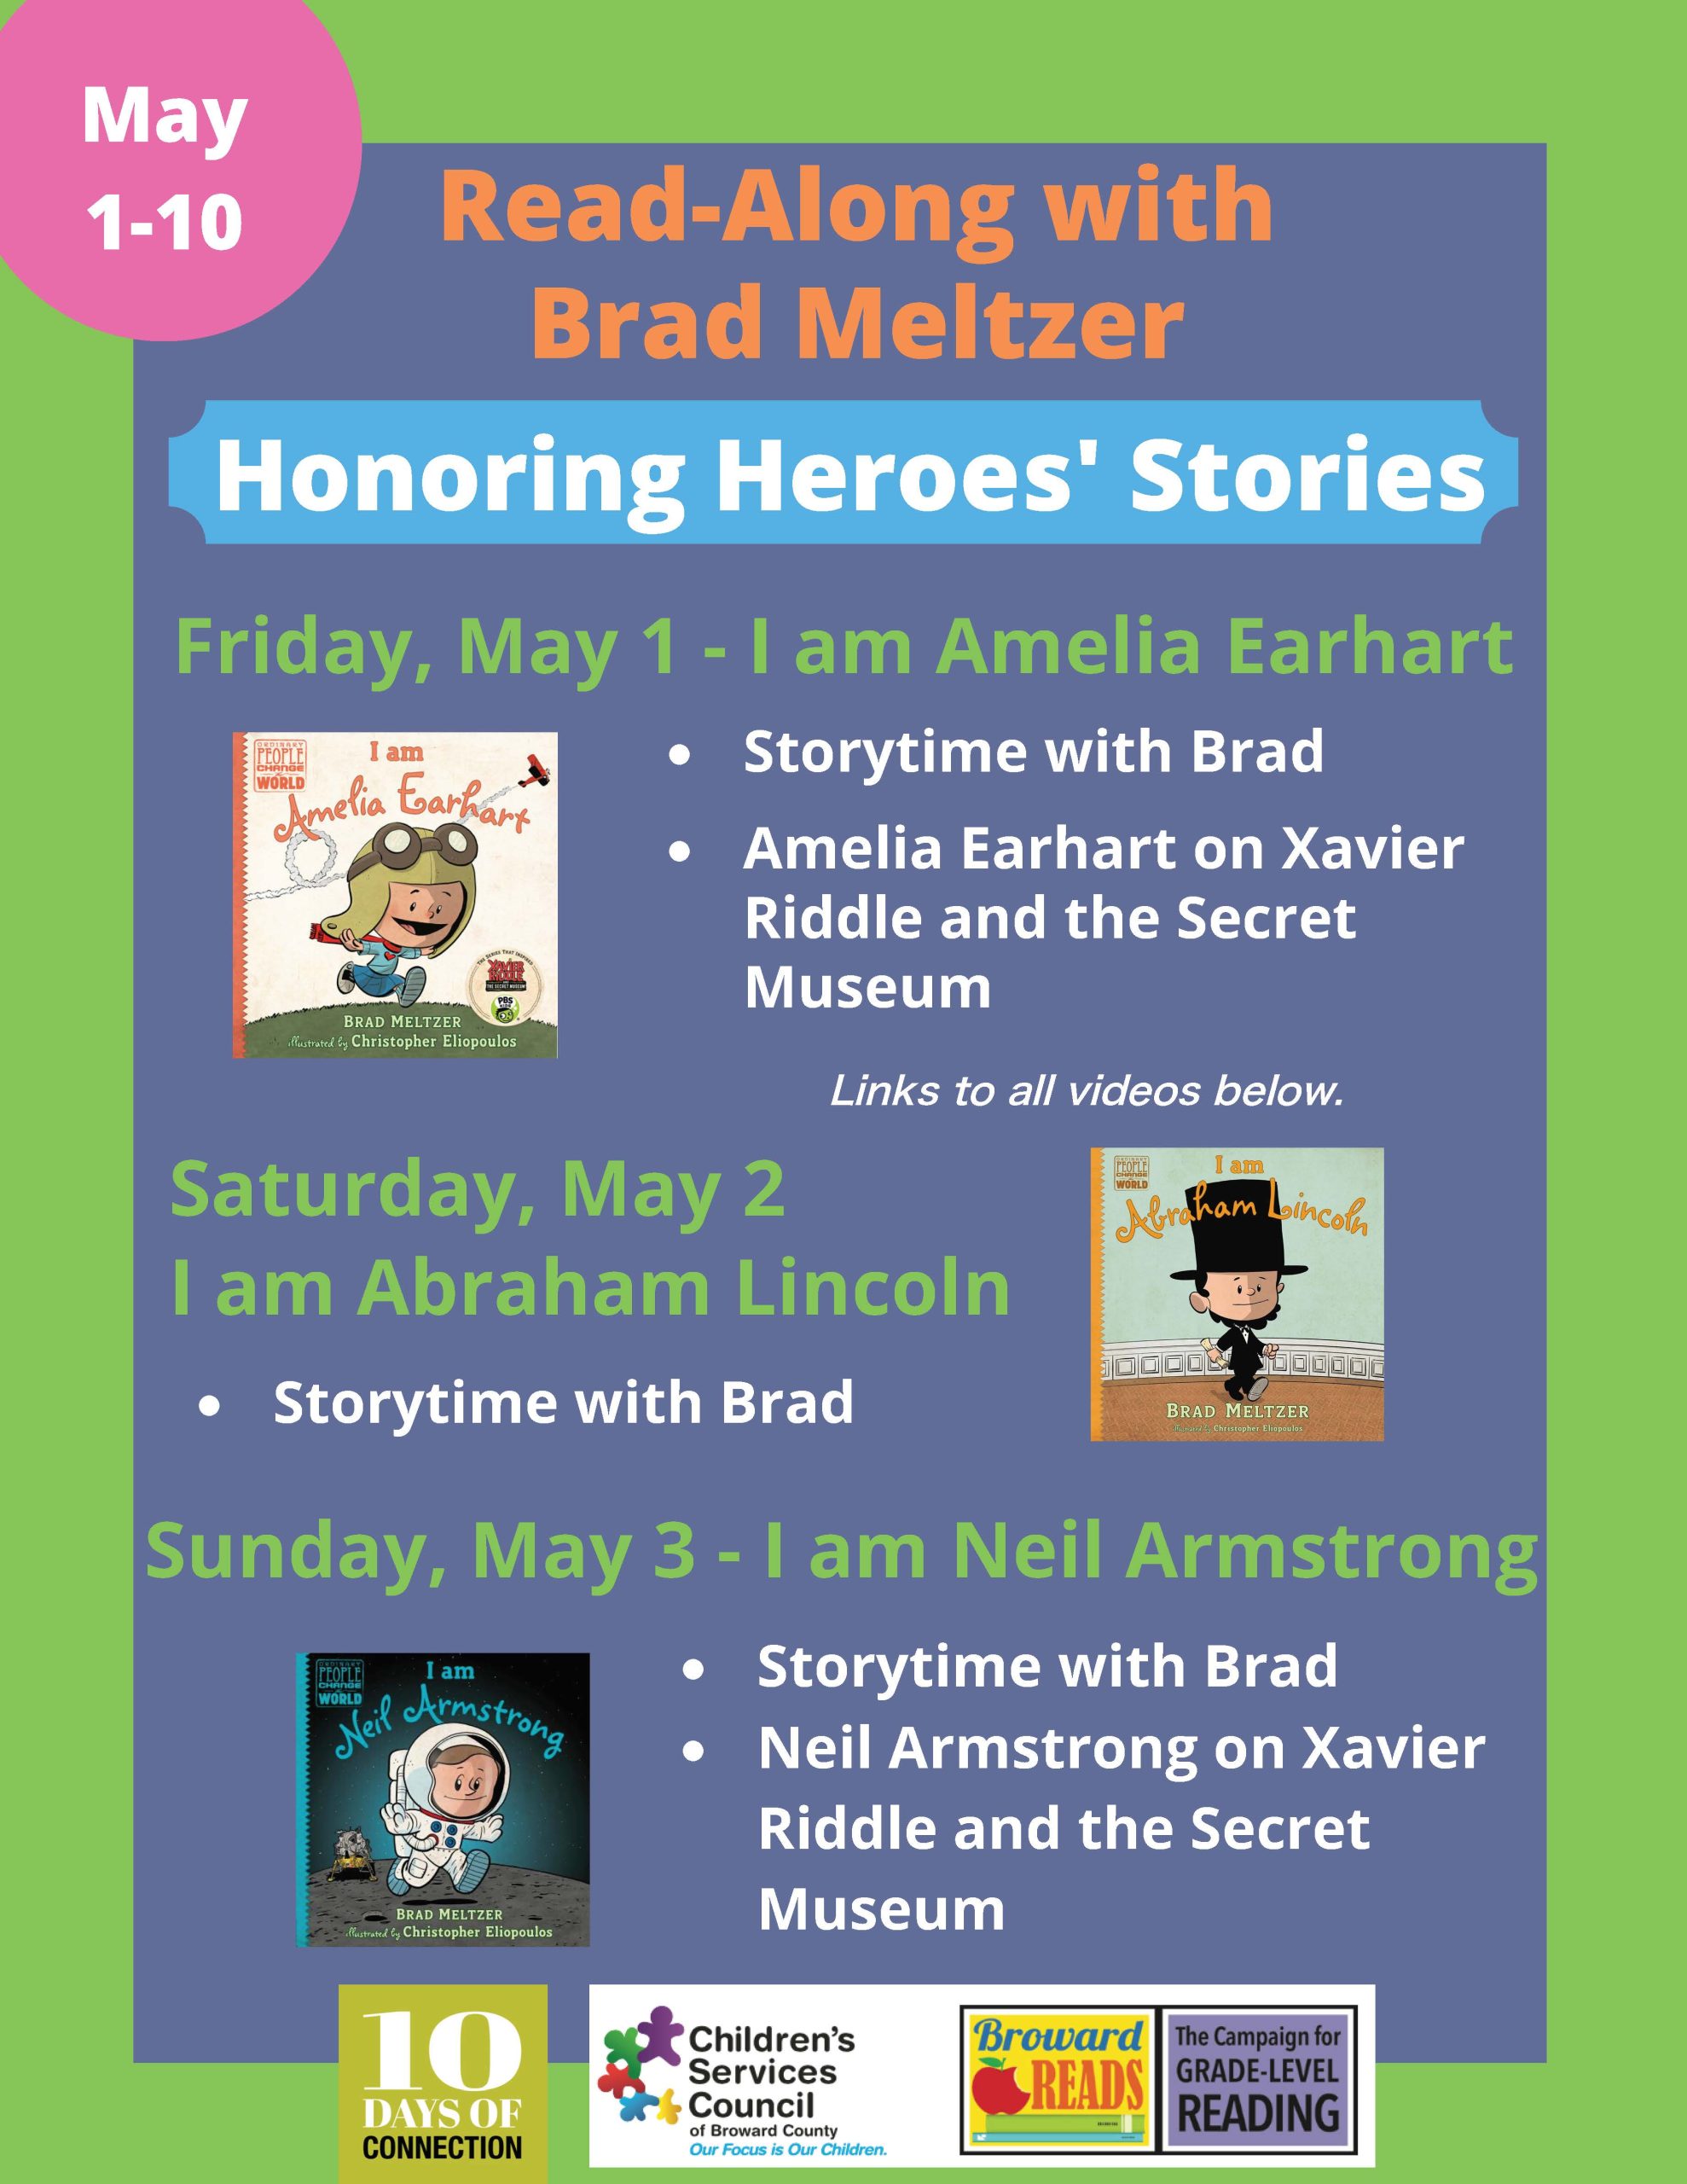 read along with brad meltzer image 1